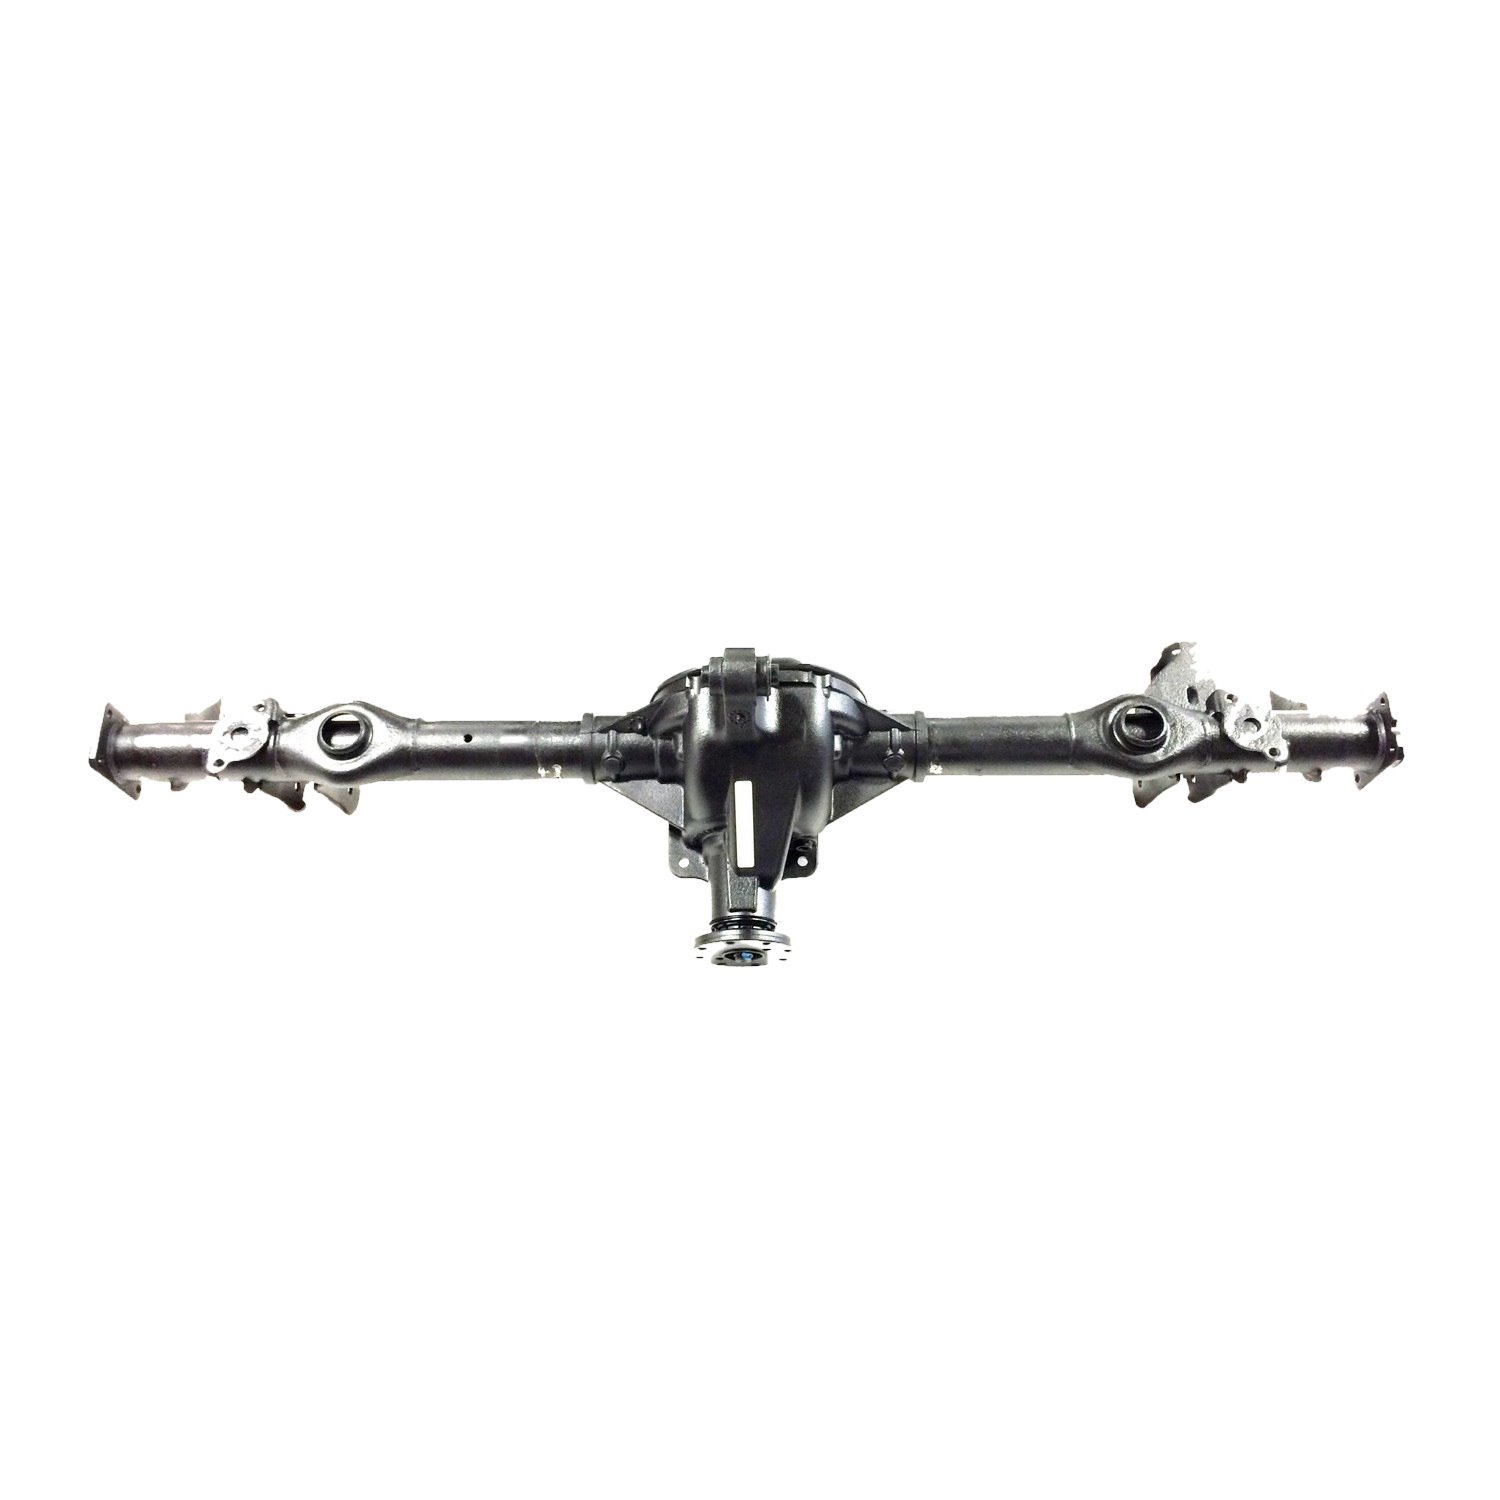 Remanufactured Rear Axle Assembly for 1997-2002 Jeep Wrangler with 4:45 Gear Ratio.